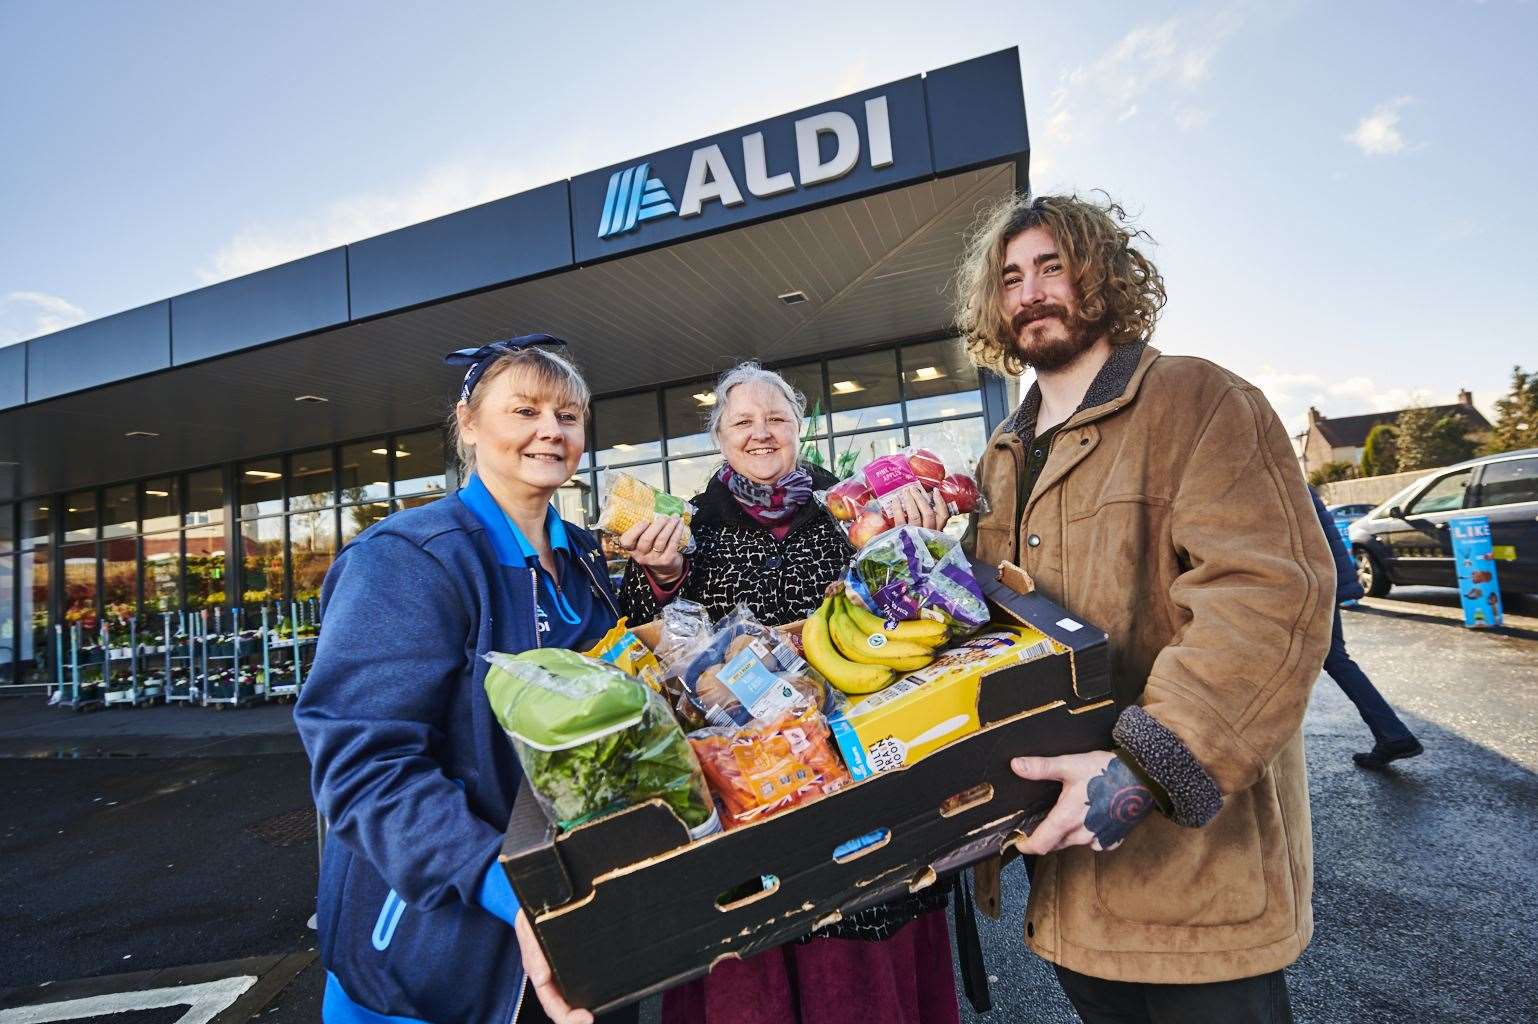 Aldi is calling on local charities, community groups and foodbanks in Aberdeenshire to sign up now.